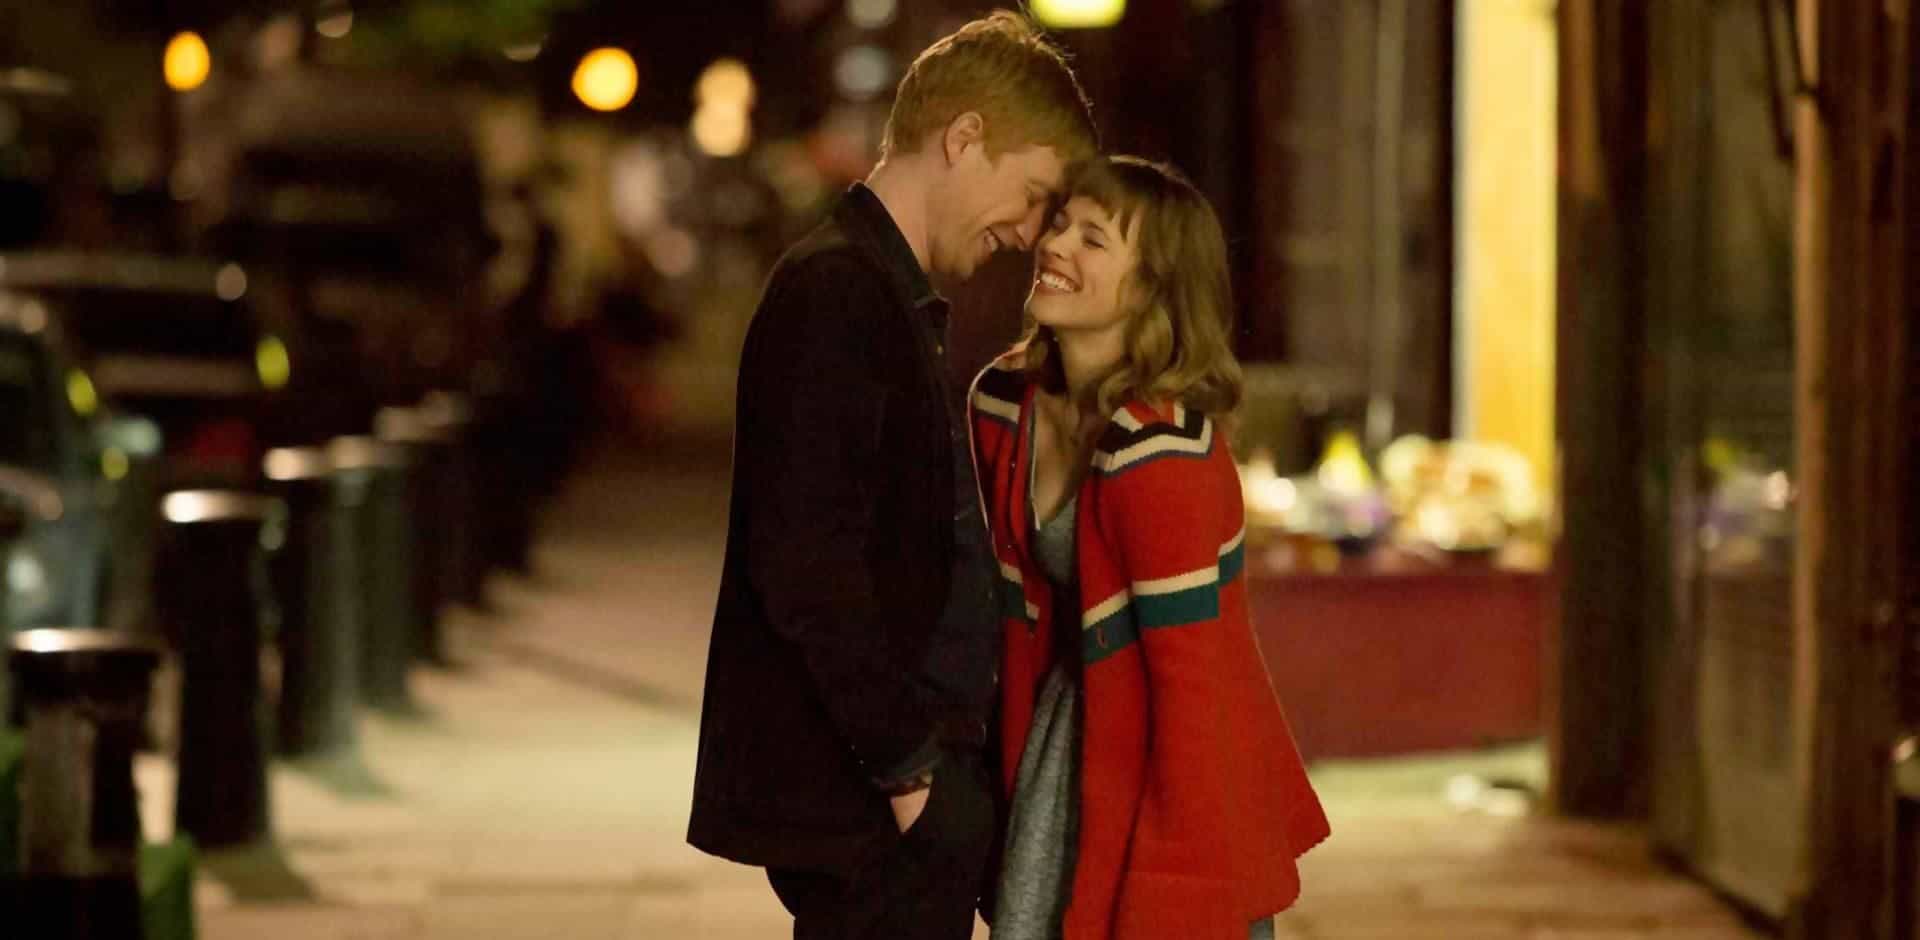 Domhnall Gleeson and Rachel McAdams in the movie 'About time'